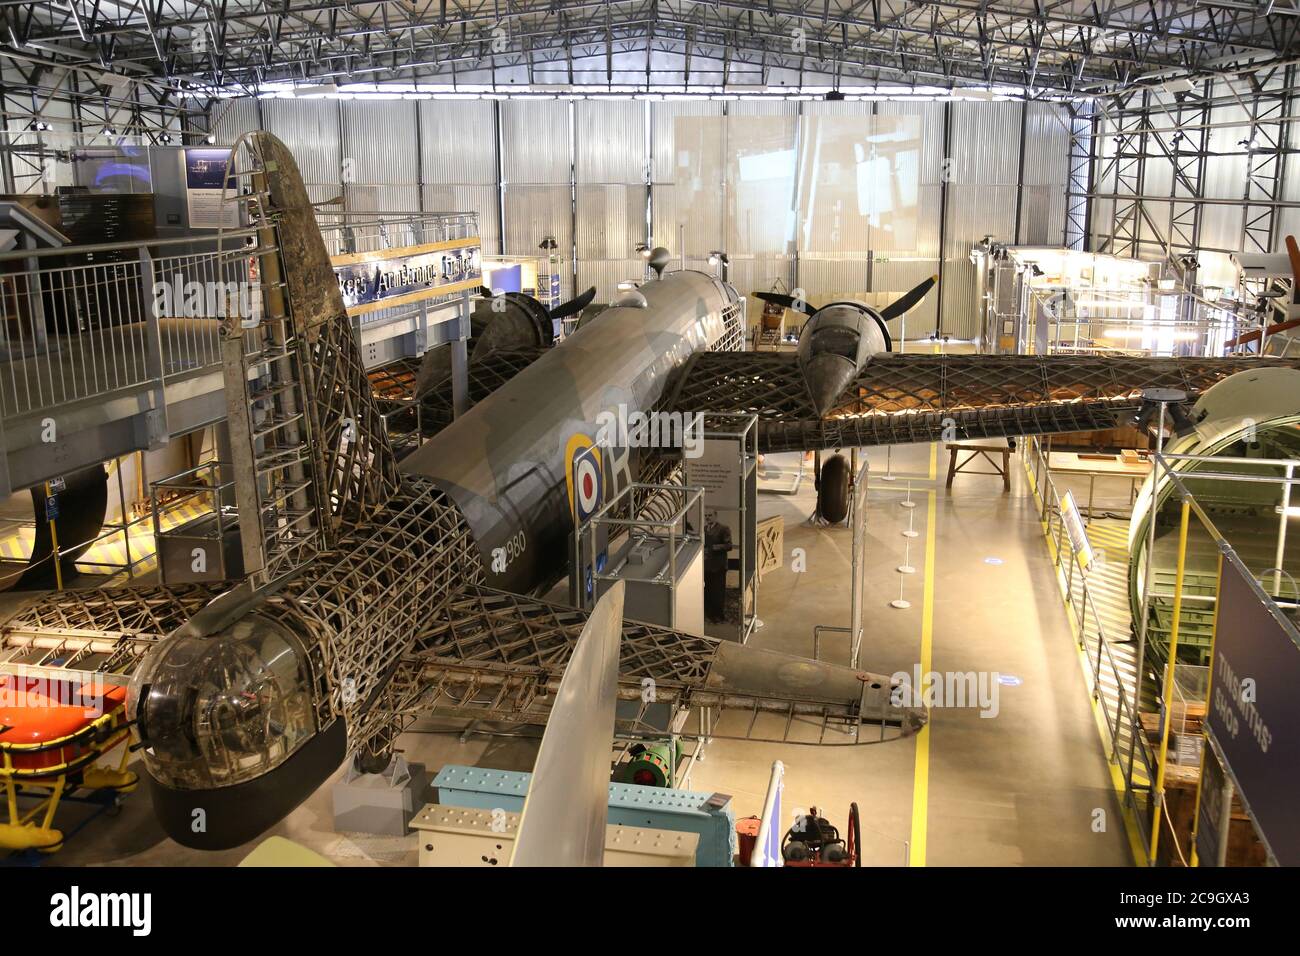 Vickers Wellington Mk1A bomber. Brooklands Museum re-opens after Covid19 lockdown, 1st Aug 2020. Weybridge, Surrey, England, Great Britain, UK, Europe Stock Photo